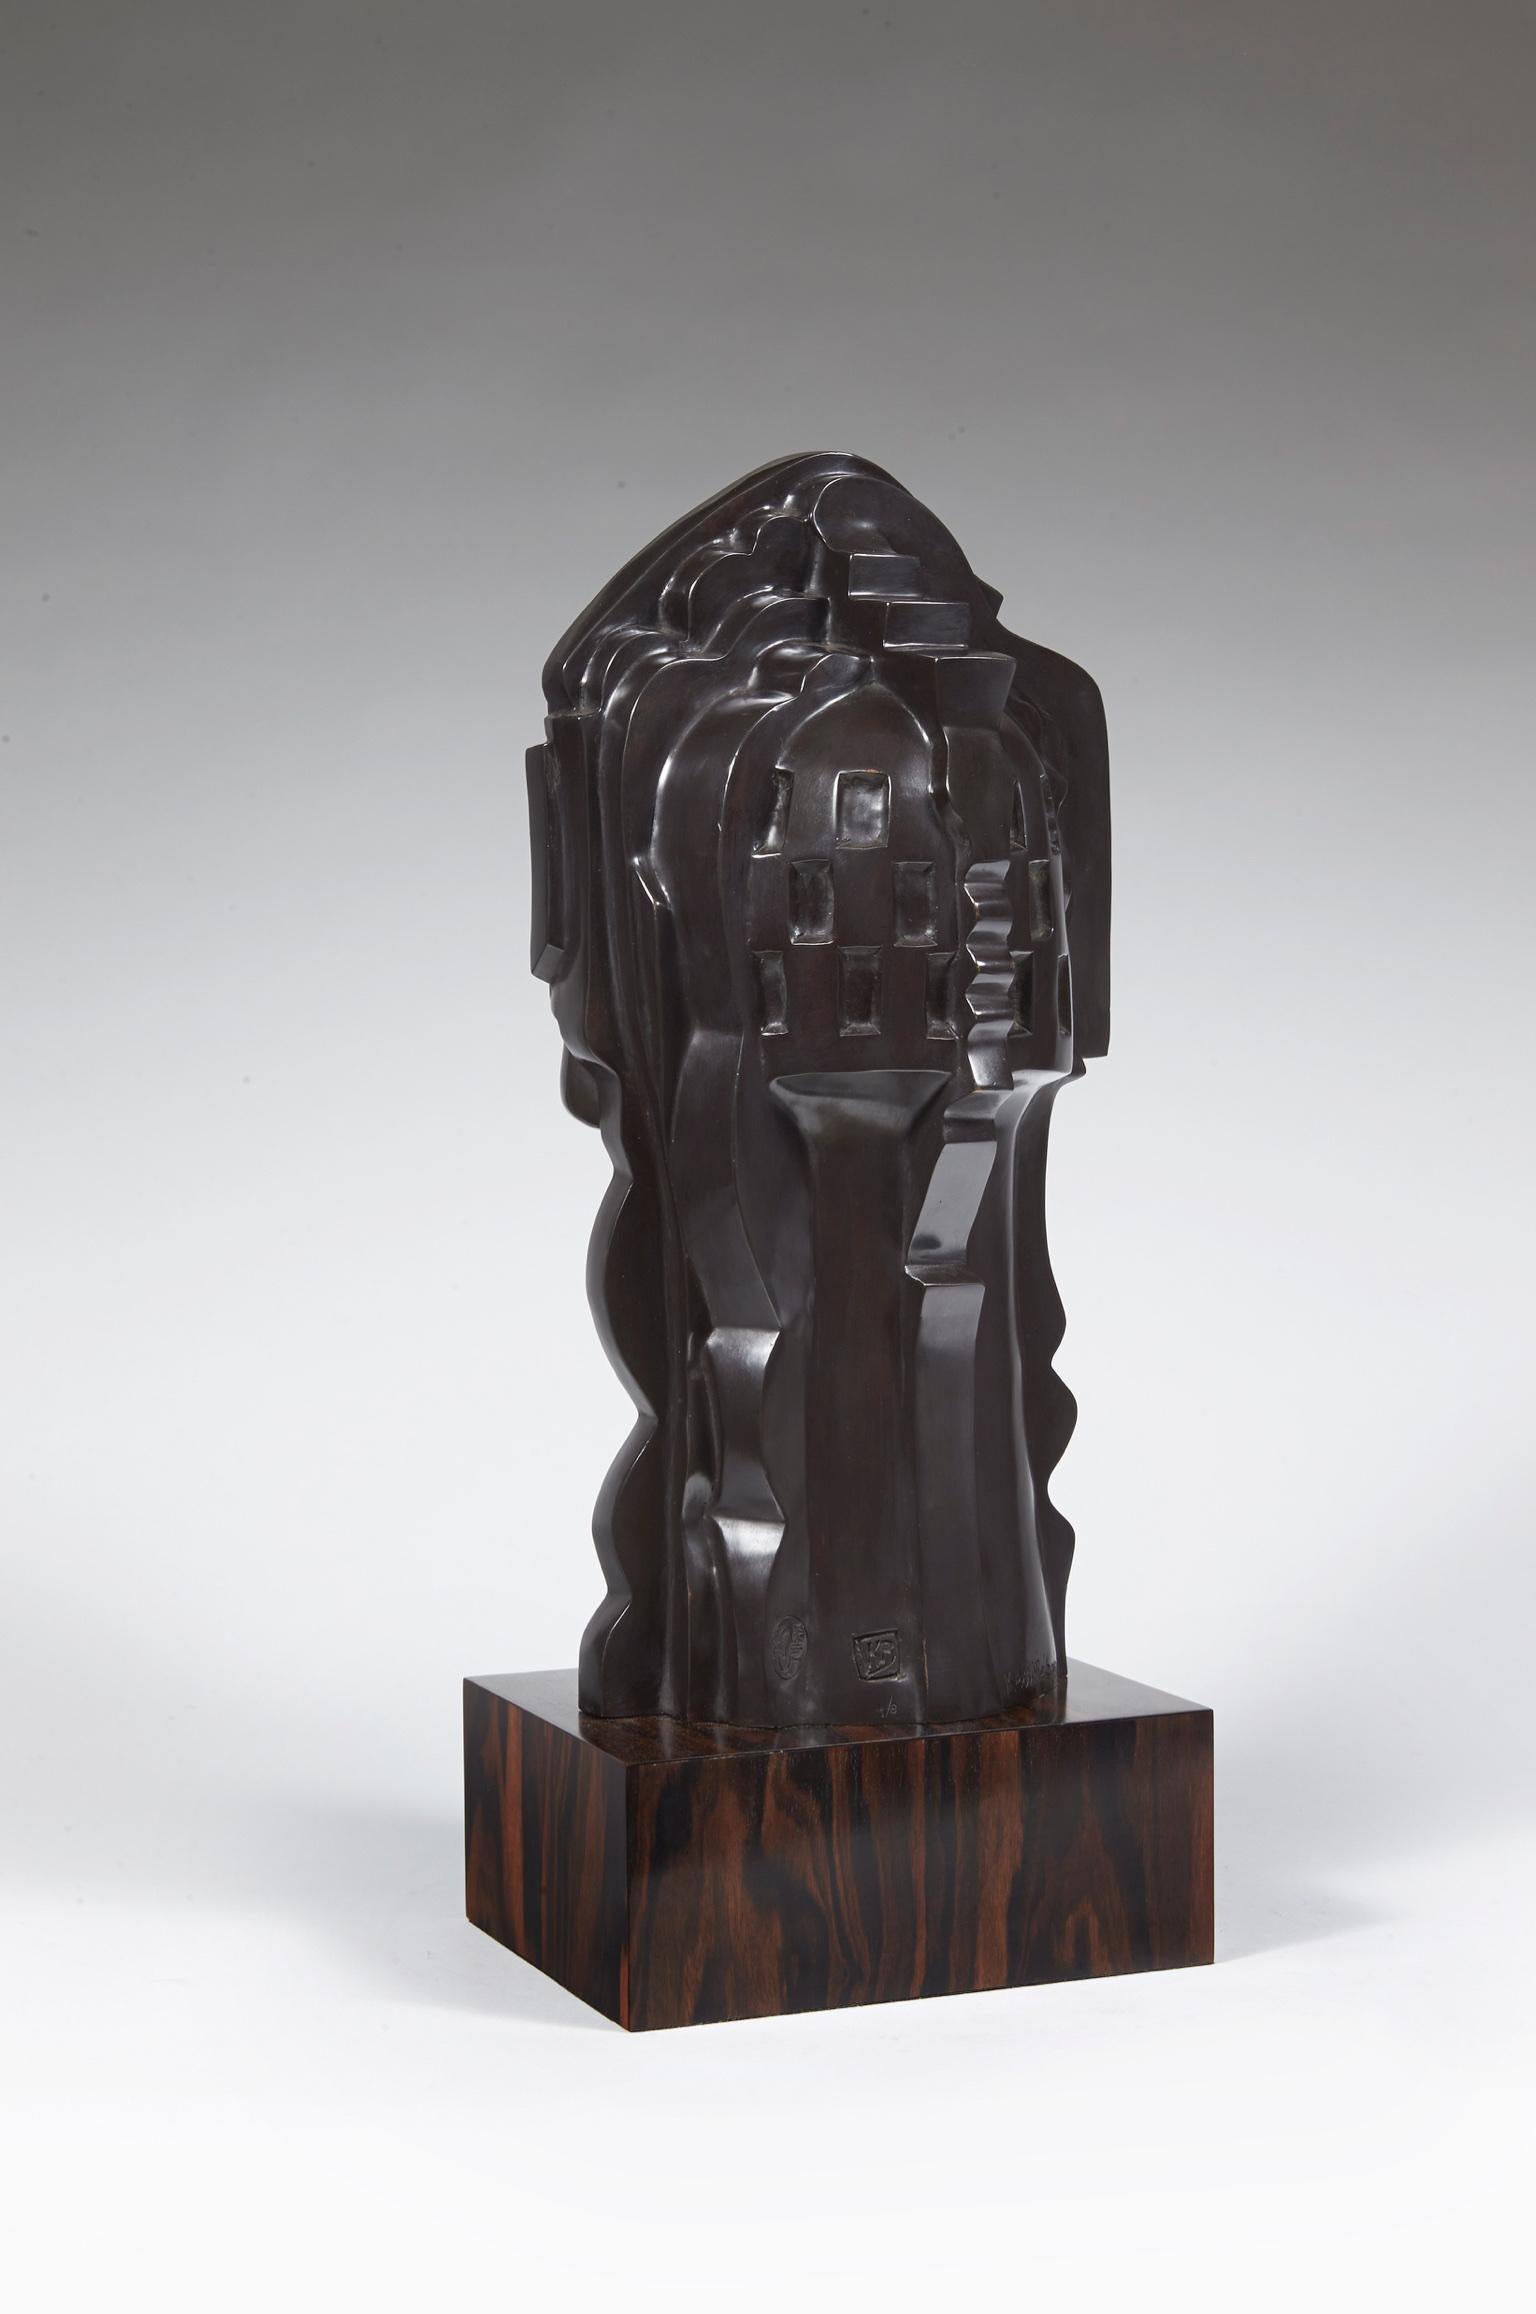 Bronze with black patina on an ebony base Limited edition of 8
Signed, stamped and numbered
Seal of the founder.